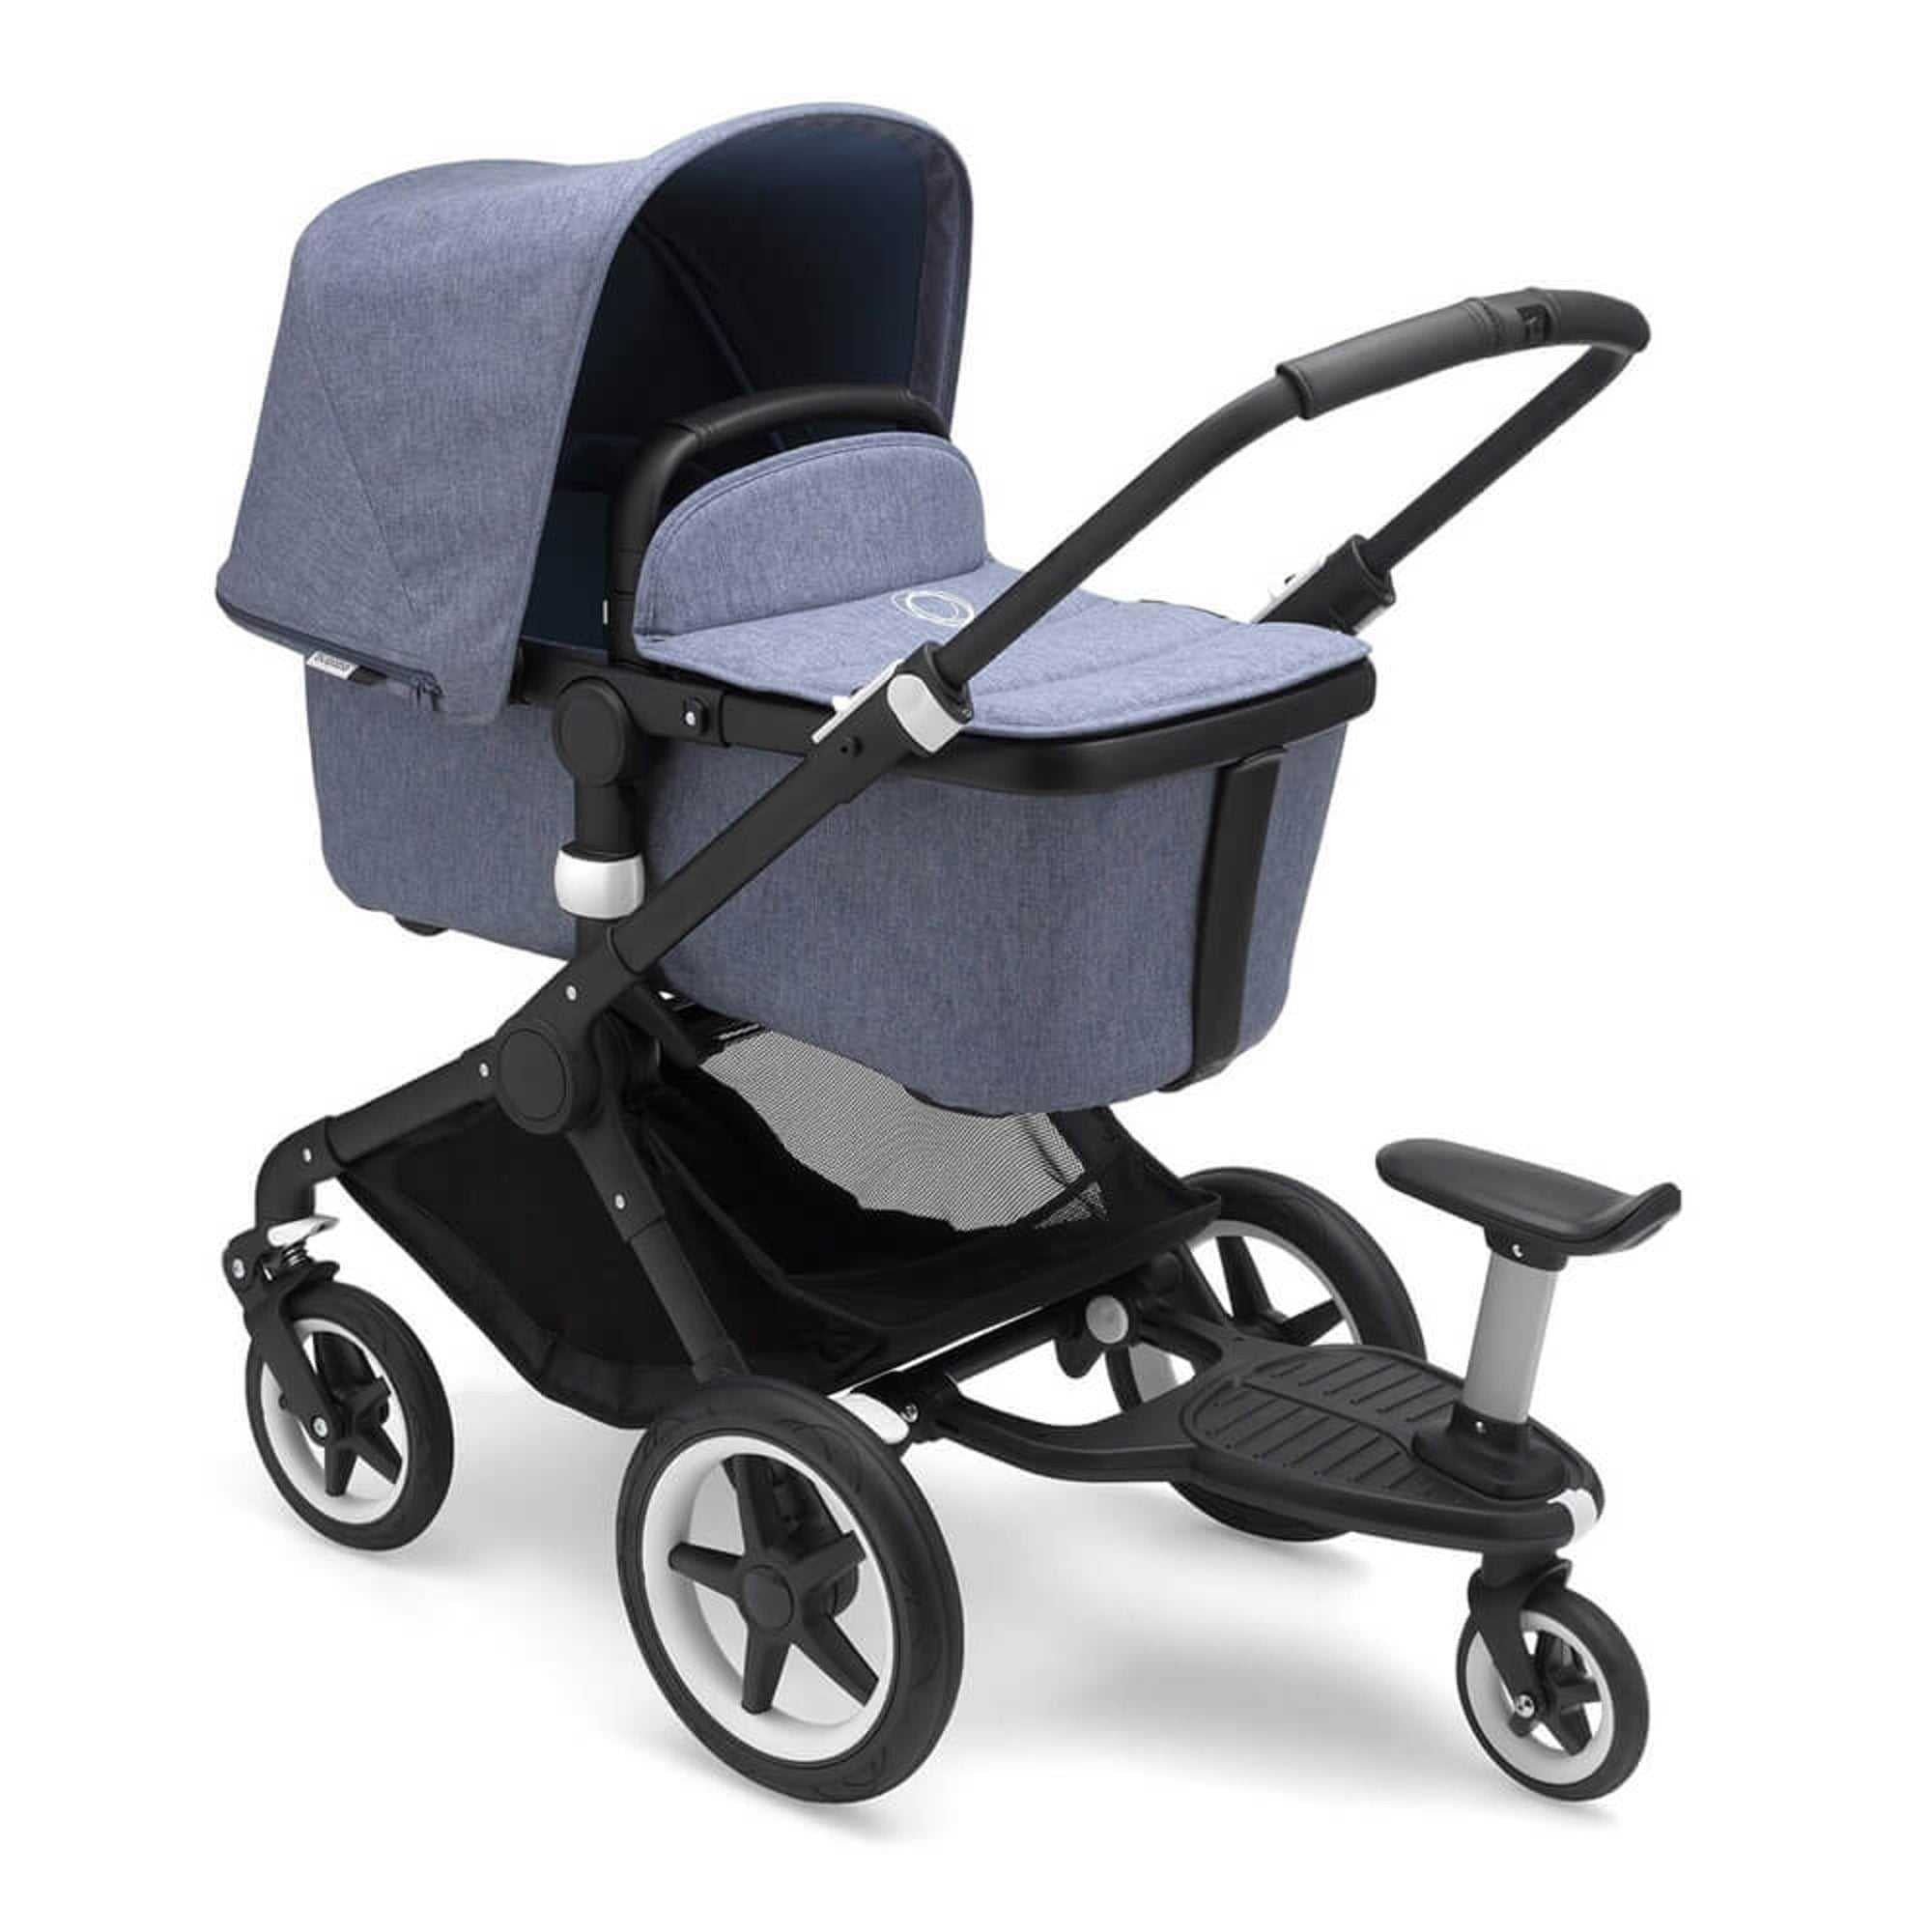 Bugaboo comfort wheeled board - Tiny Tots Baby Store 